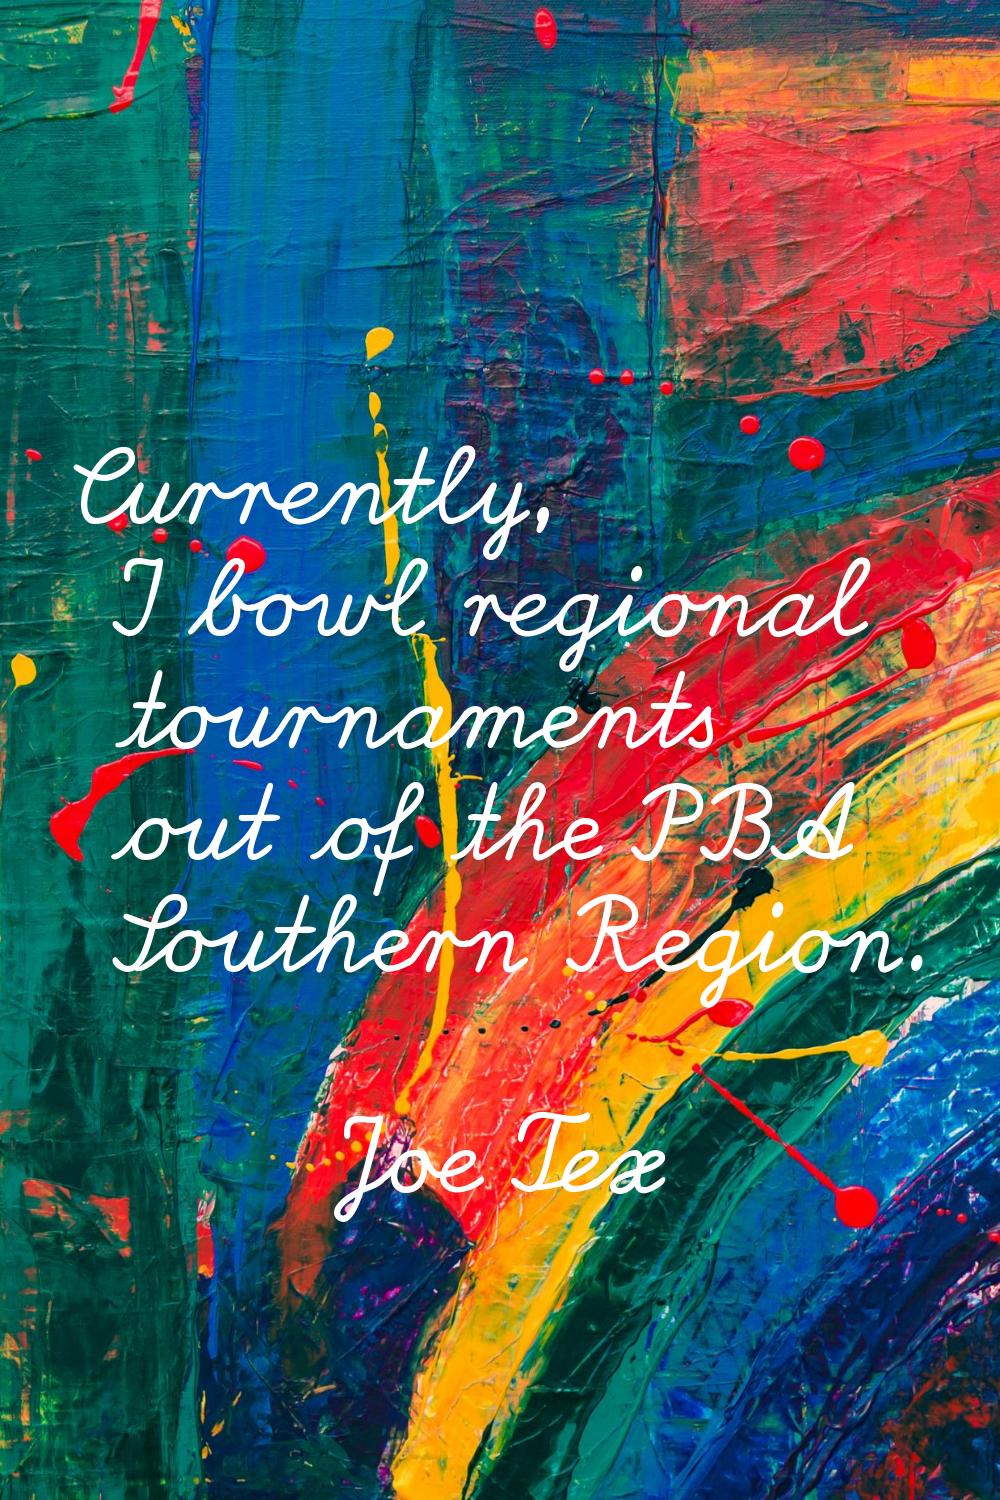 Currently, I bowl regional tournaments out of the PBA Southern Region.